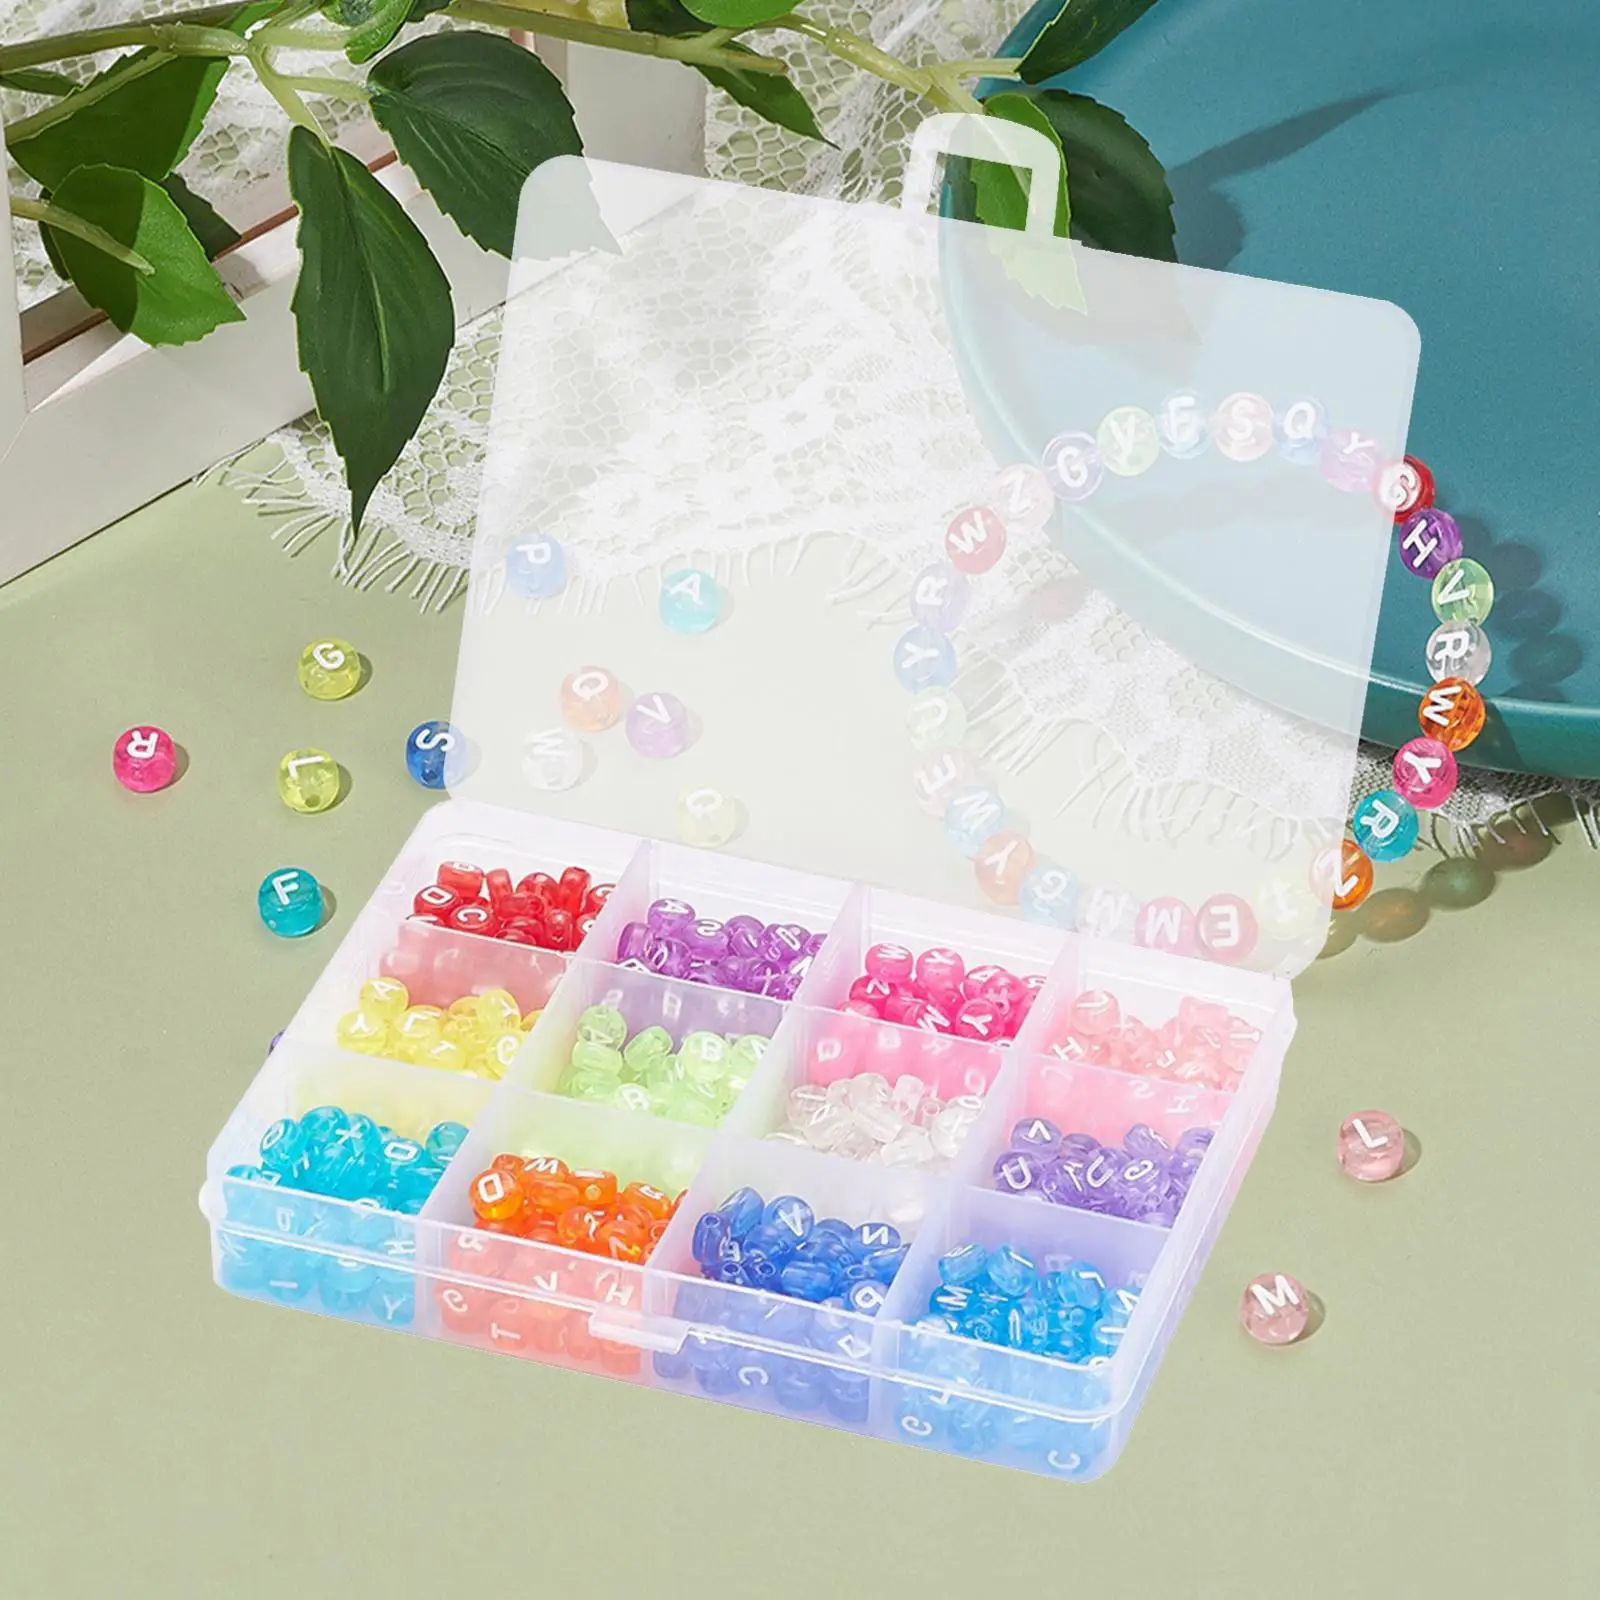 600x Acrylic Alphabet Letter Beads DIY for Jewelry Making Necklace Bracelets